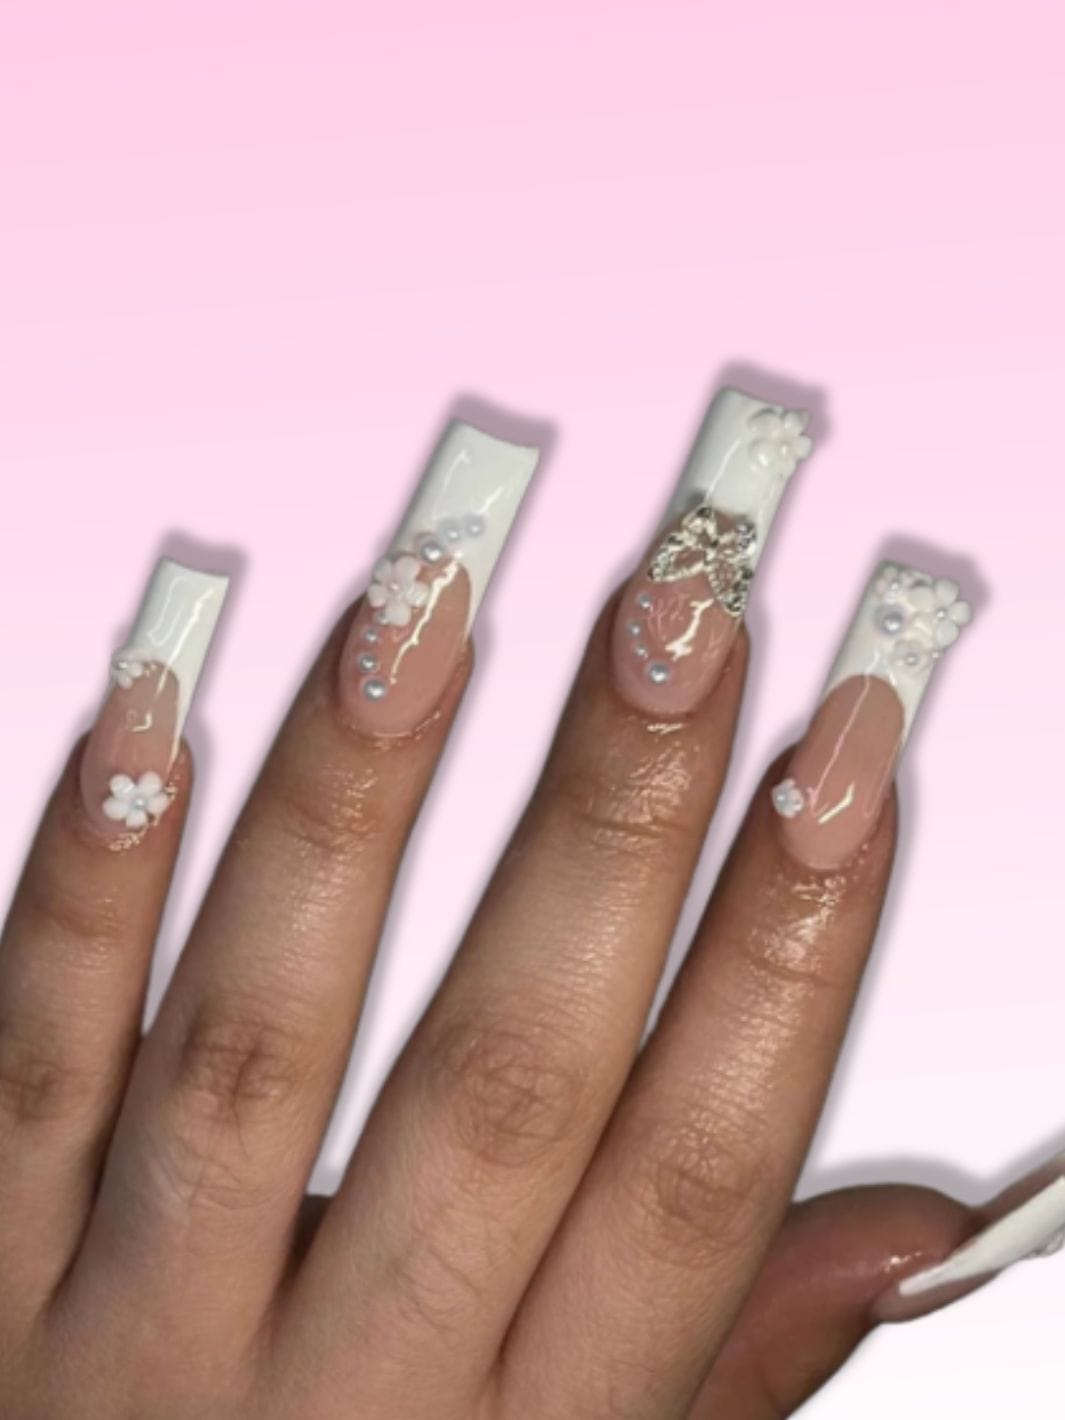 Faux ongles blancs Nail Chic